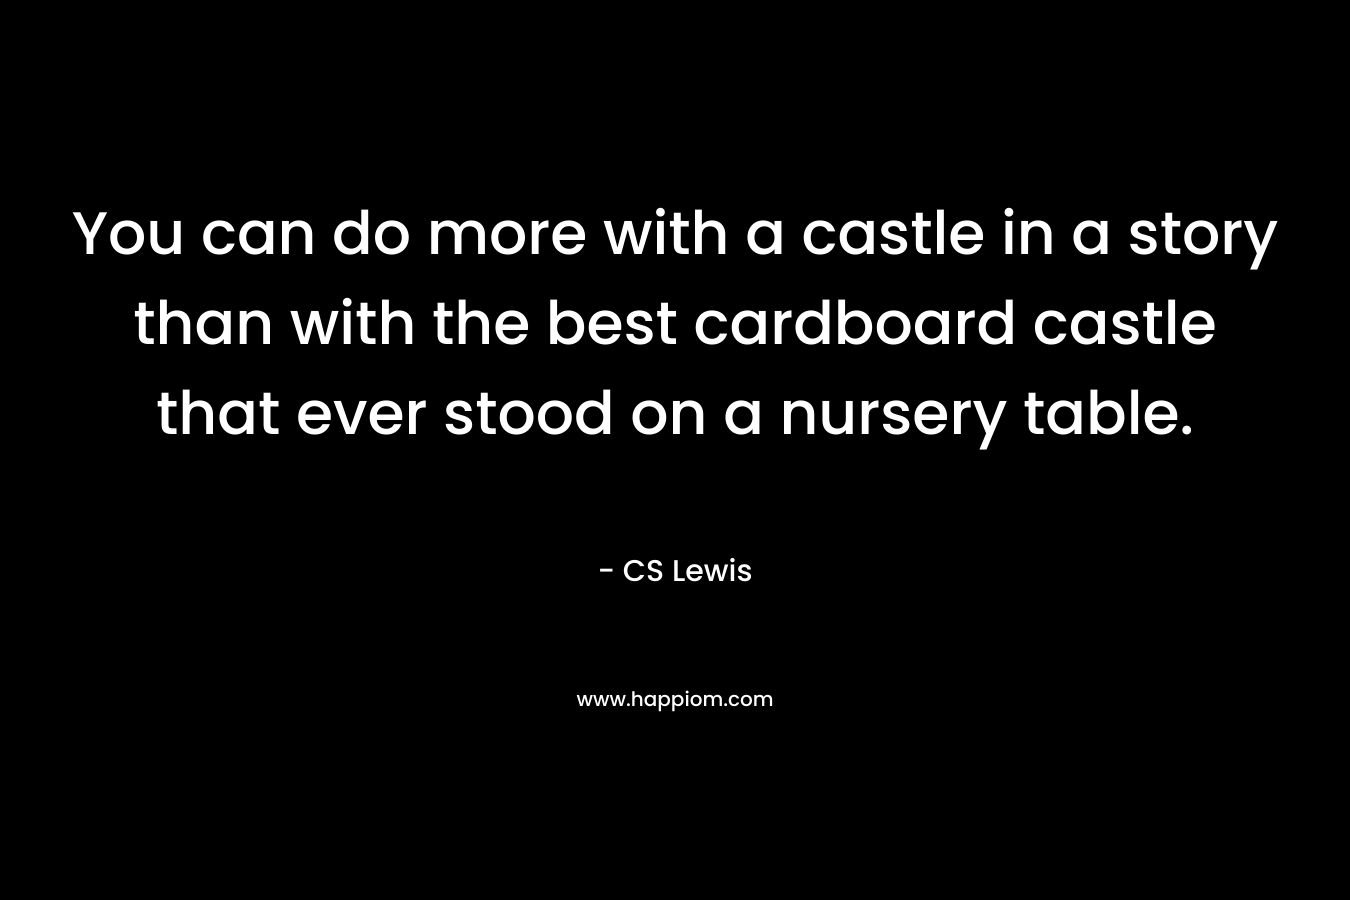 You can do more with a castle in a story than with the best cardboard castle that ever stood on a nursery table. – CS Lewis